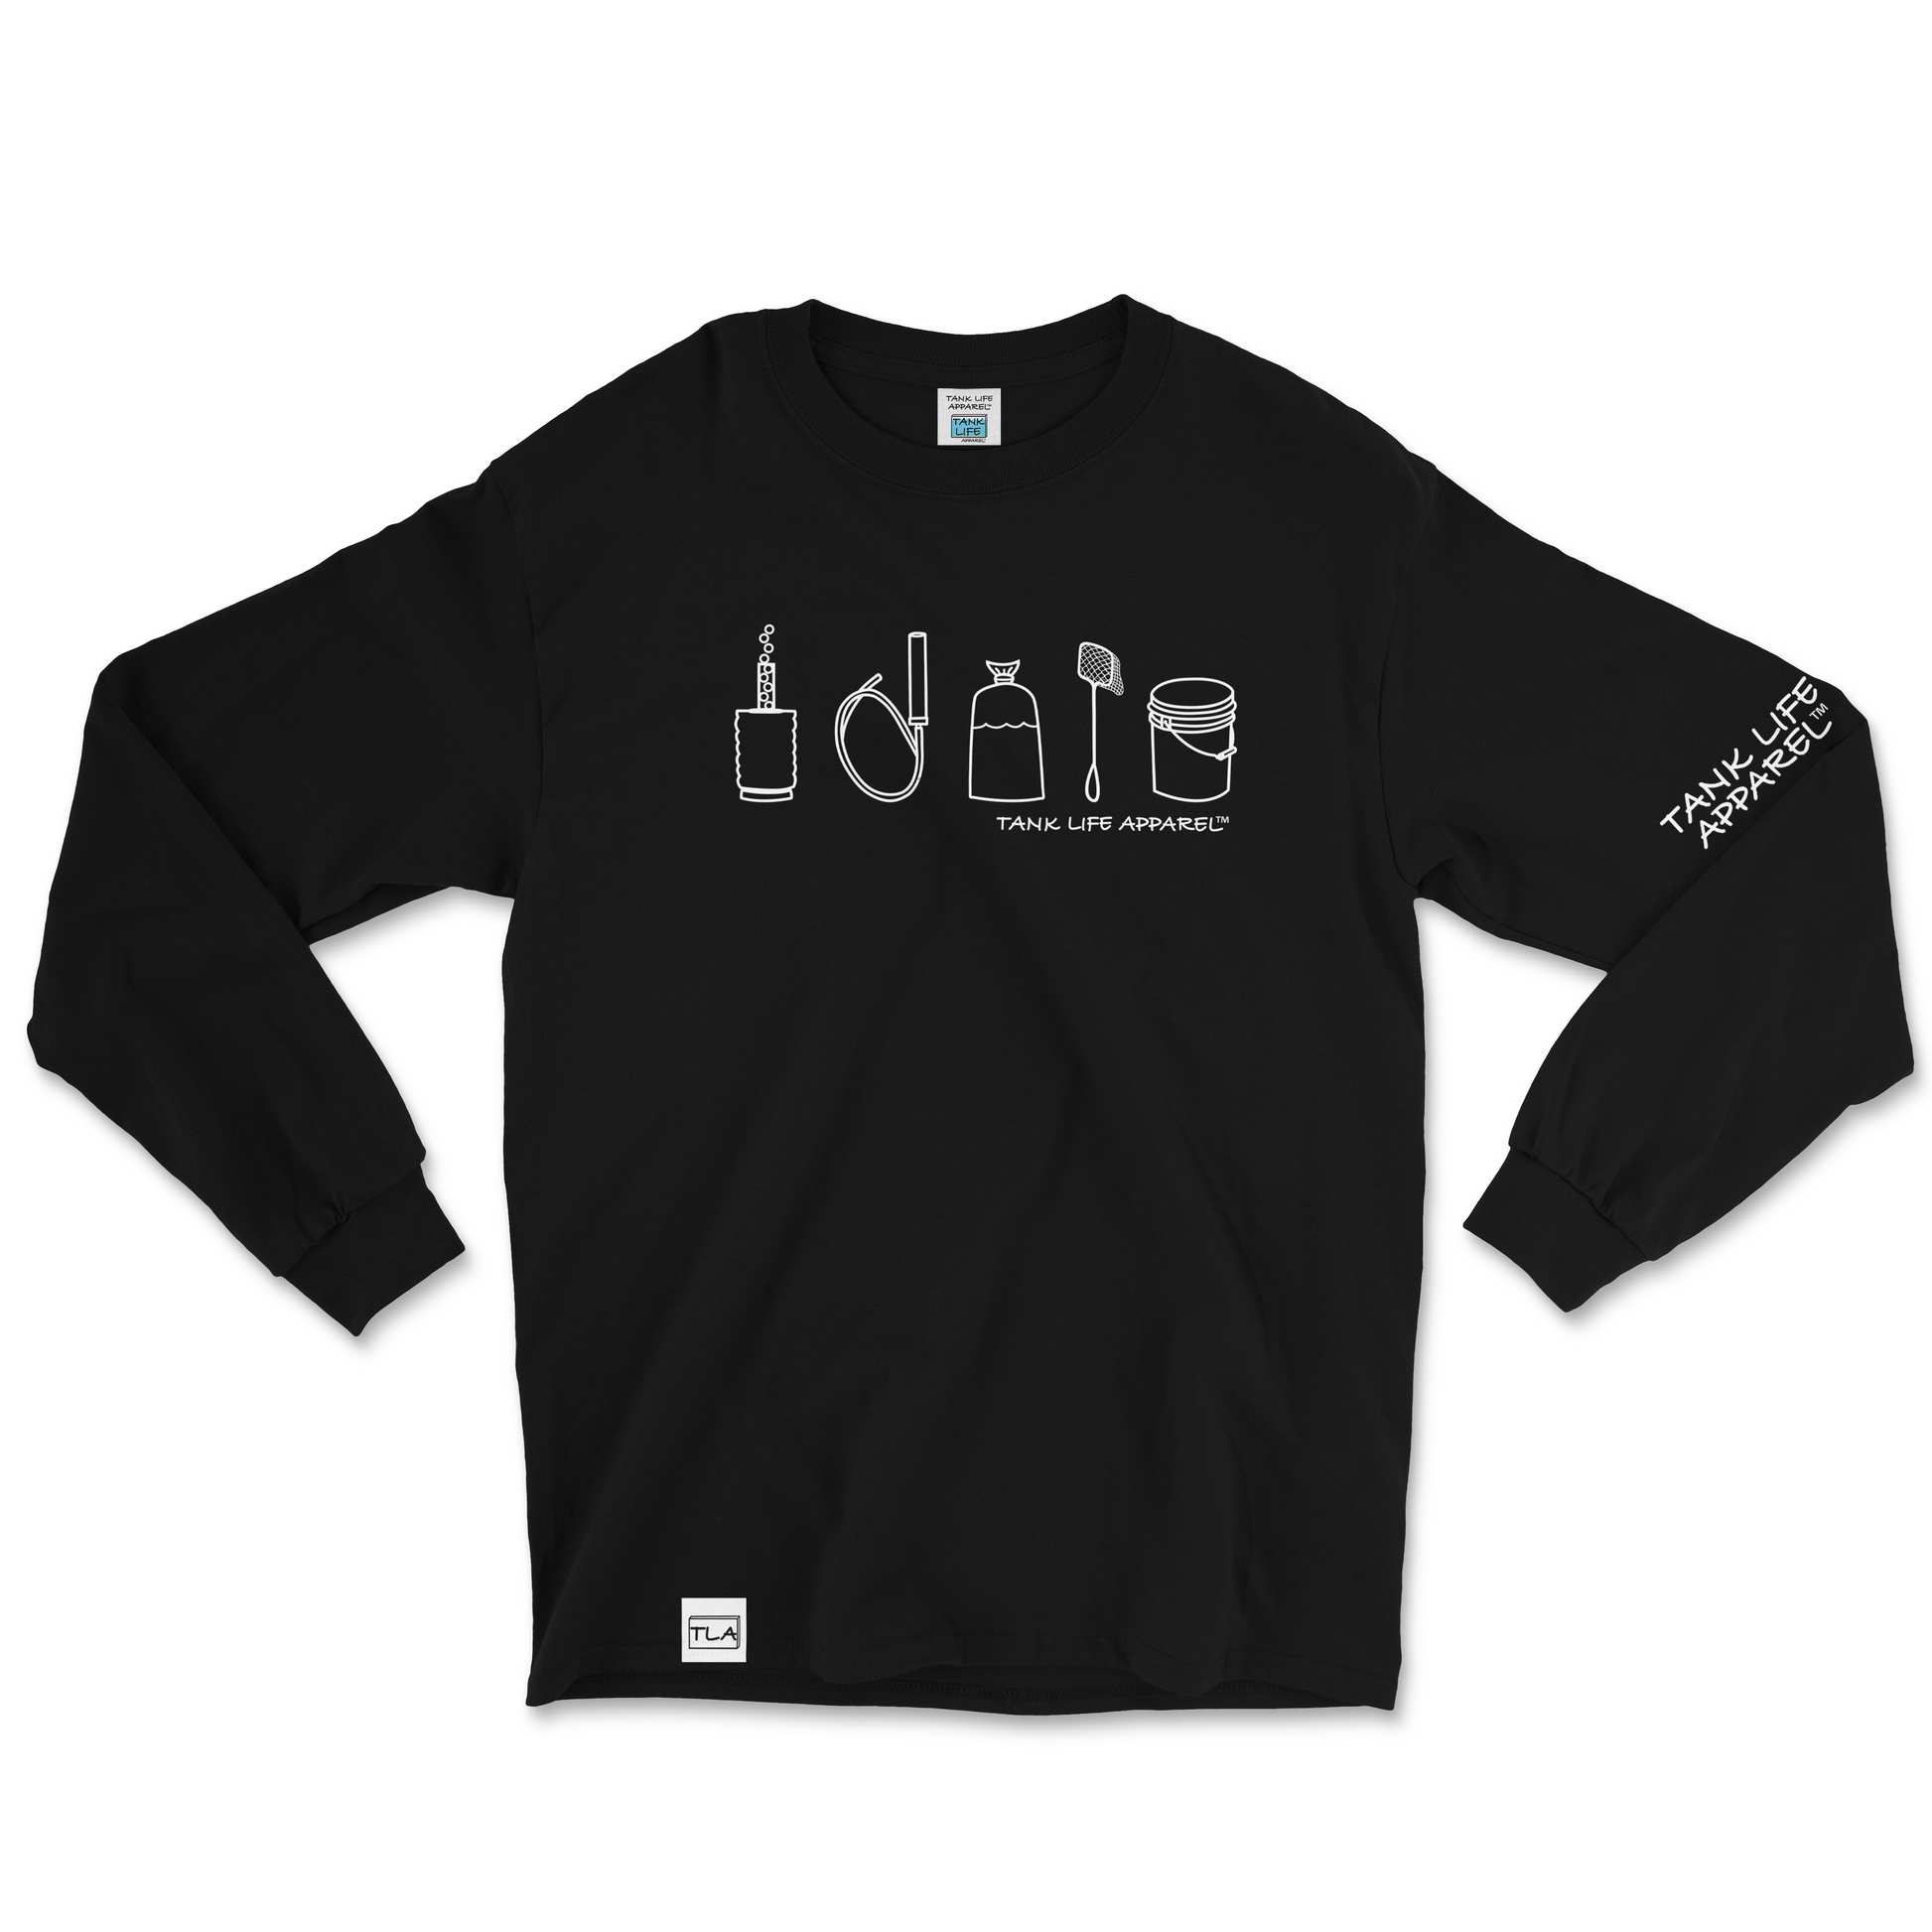 The Tank Life Apparel fish tank aquarium lifestyle on a super comfortable long sleeve shirt. simple white design that depicts a sponge filter, a syphon, a fish bag, a fish net, and a water change bucket.